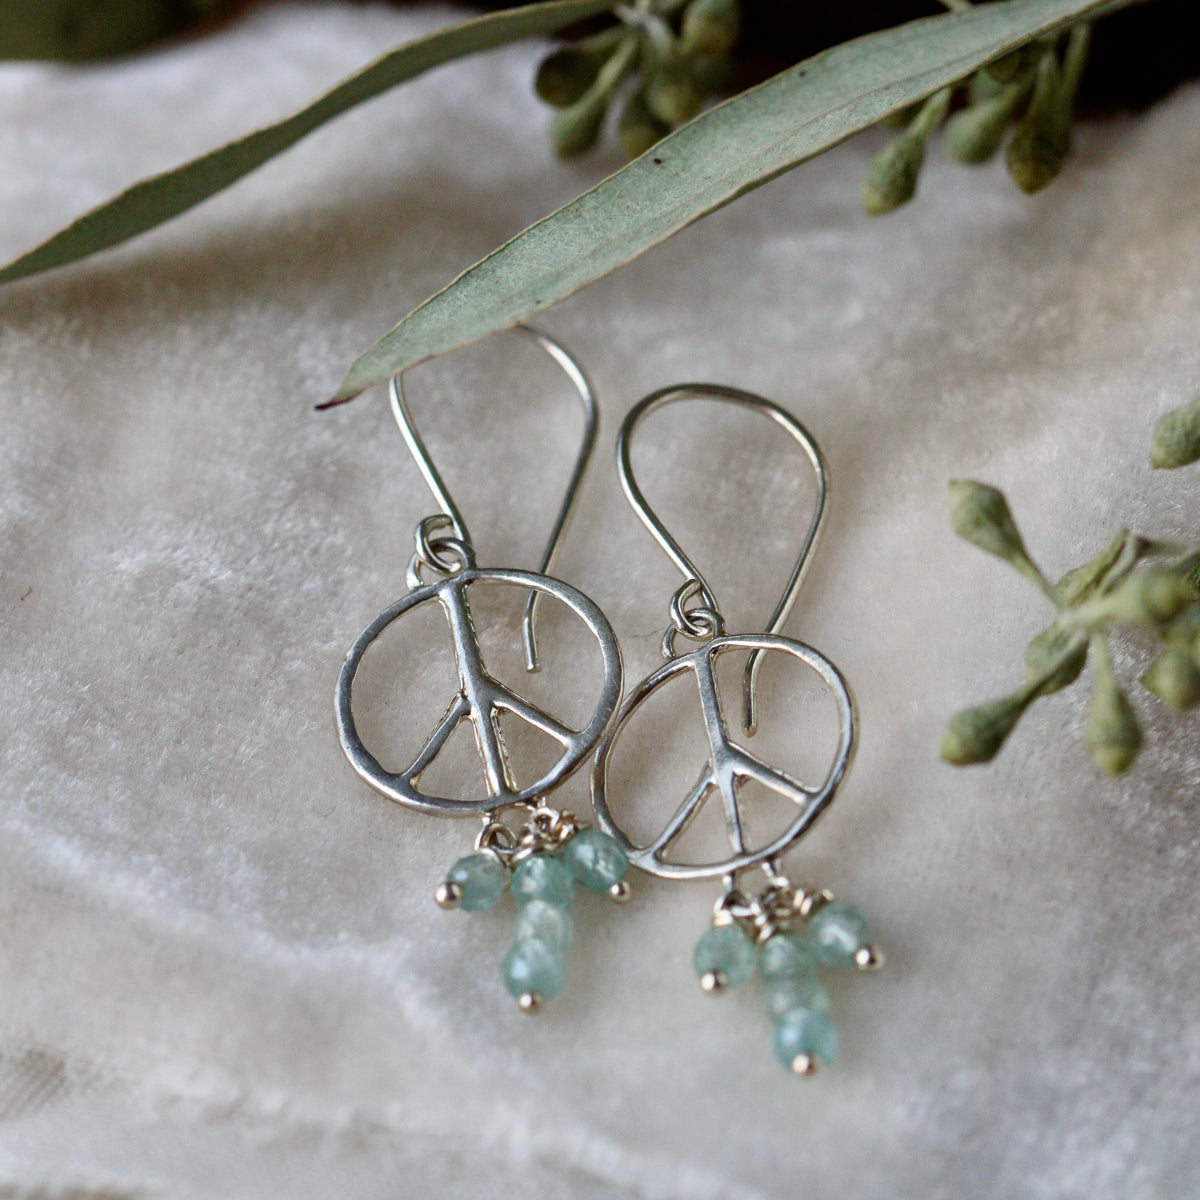 Clearance Sale Peace symbol dangle earrings sterling and apatite